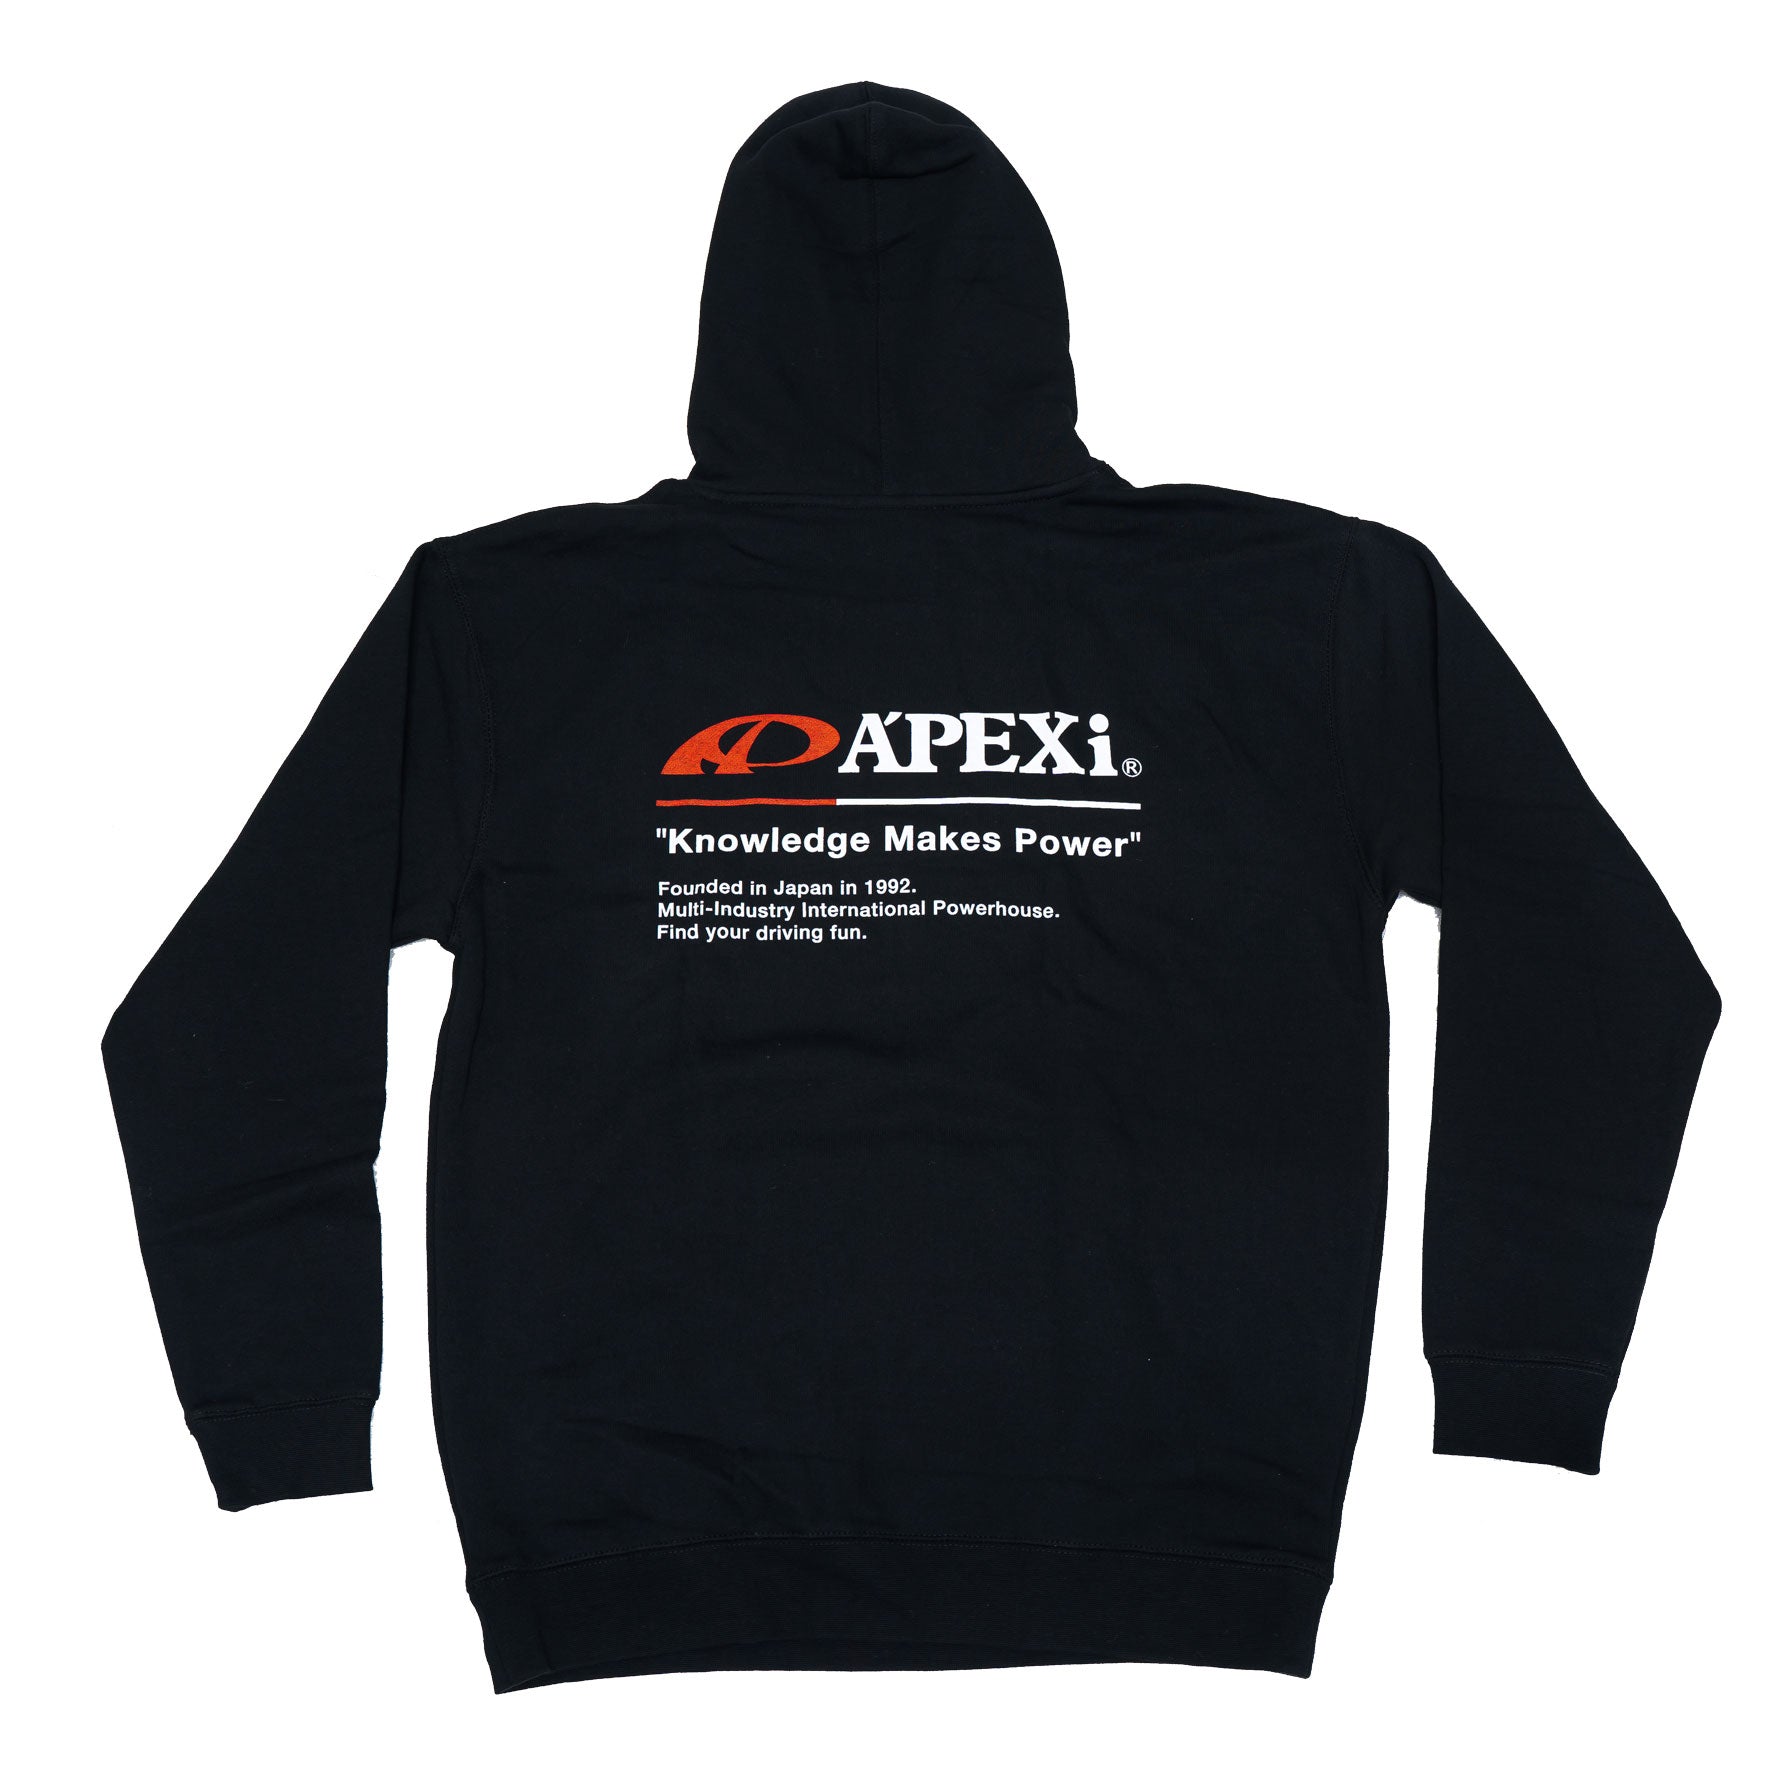 A'PEXi Hoodie - Classic Knowledge Makes Power - Black - 0